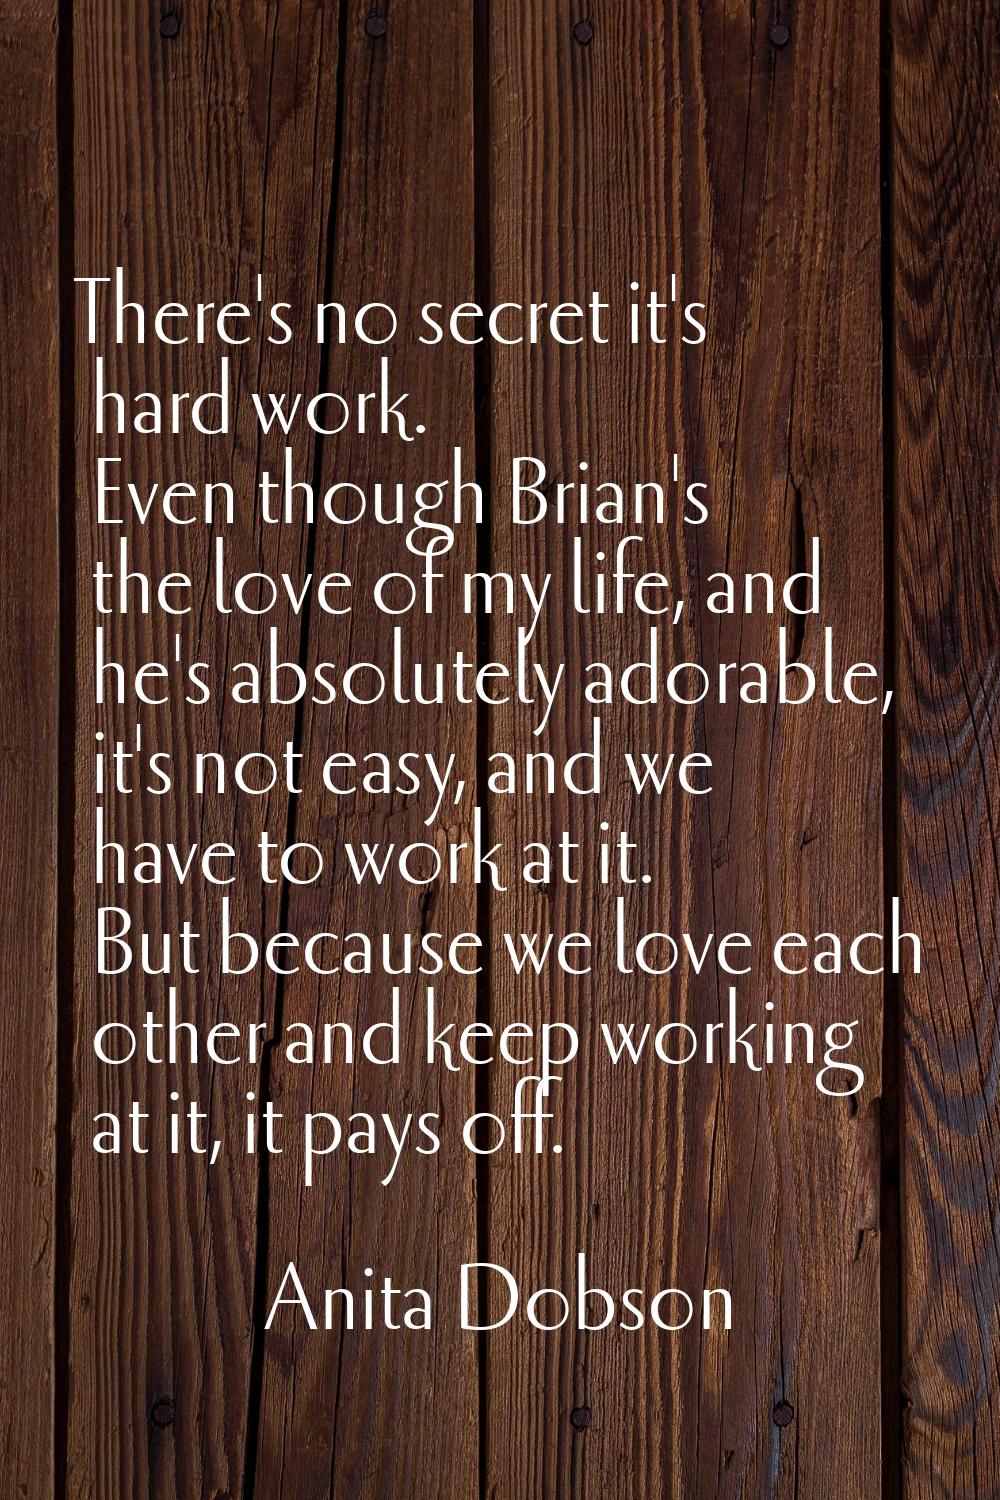 There's no secret it's hard work. Even though Brian's the love of my life, and he's absolutely ador